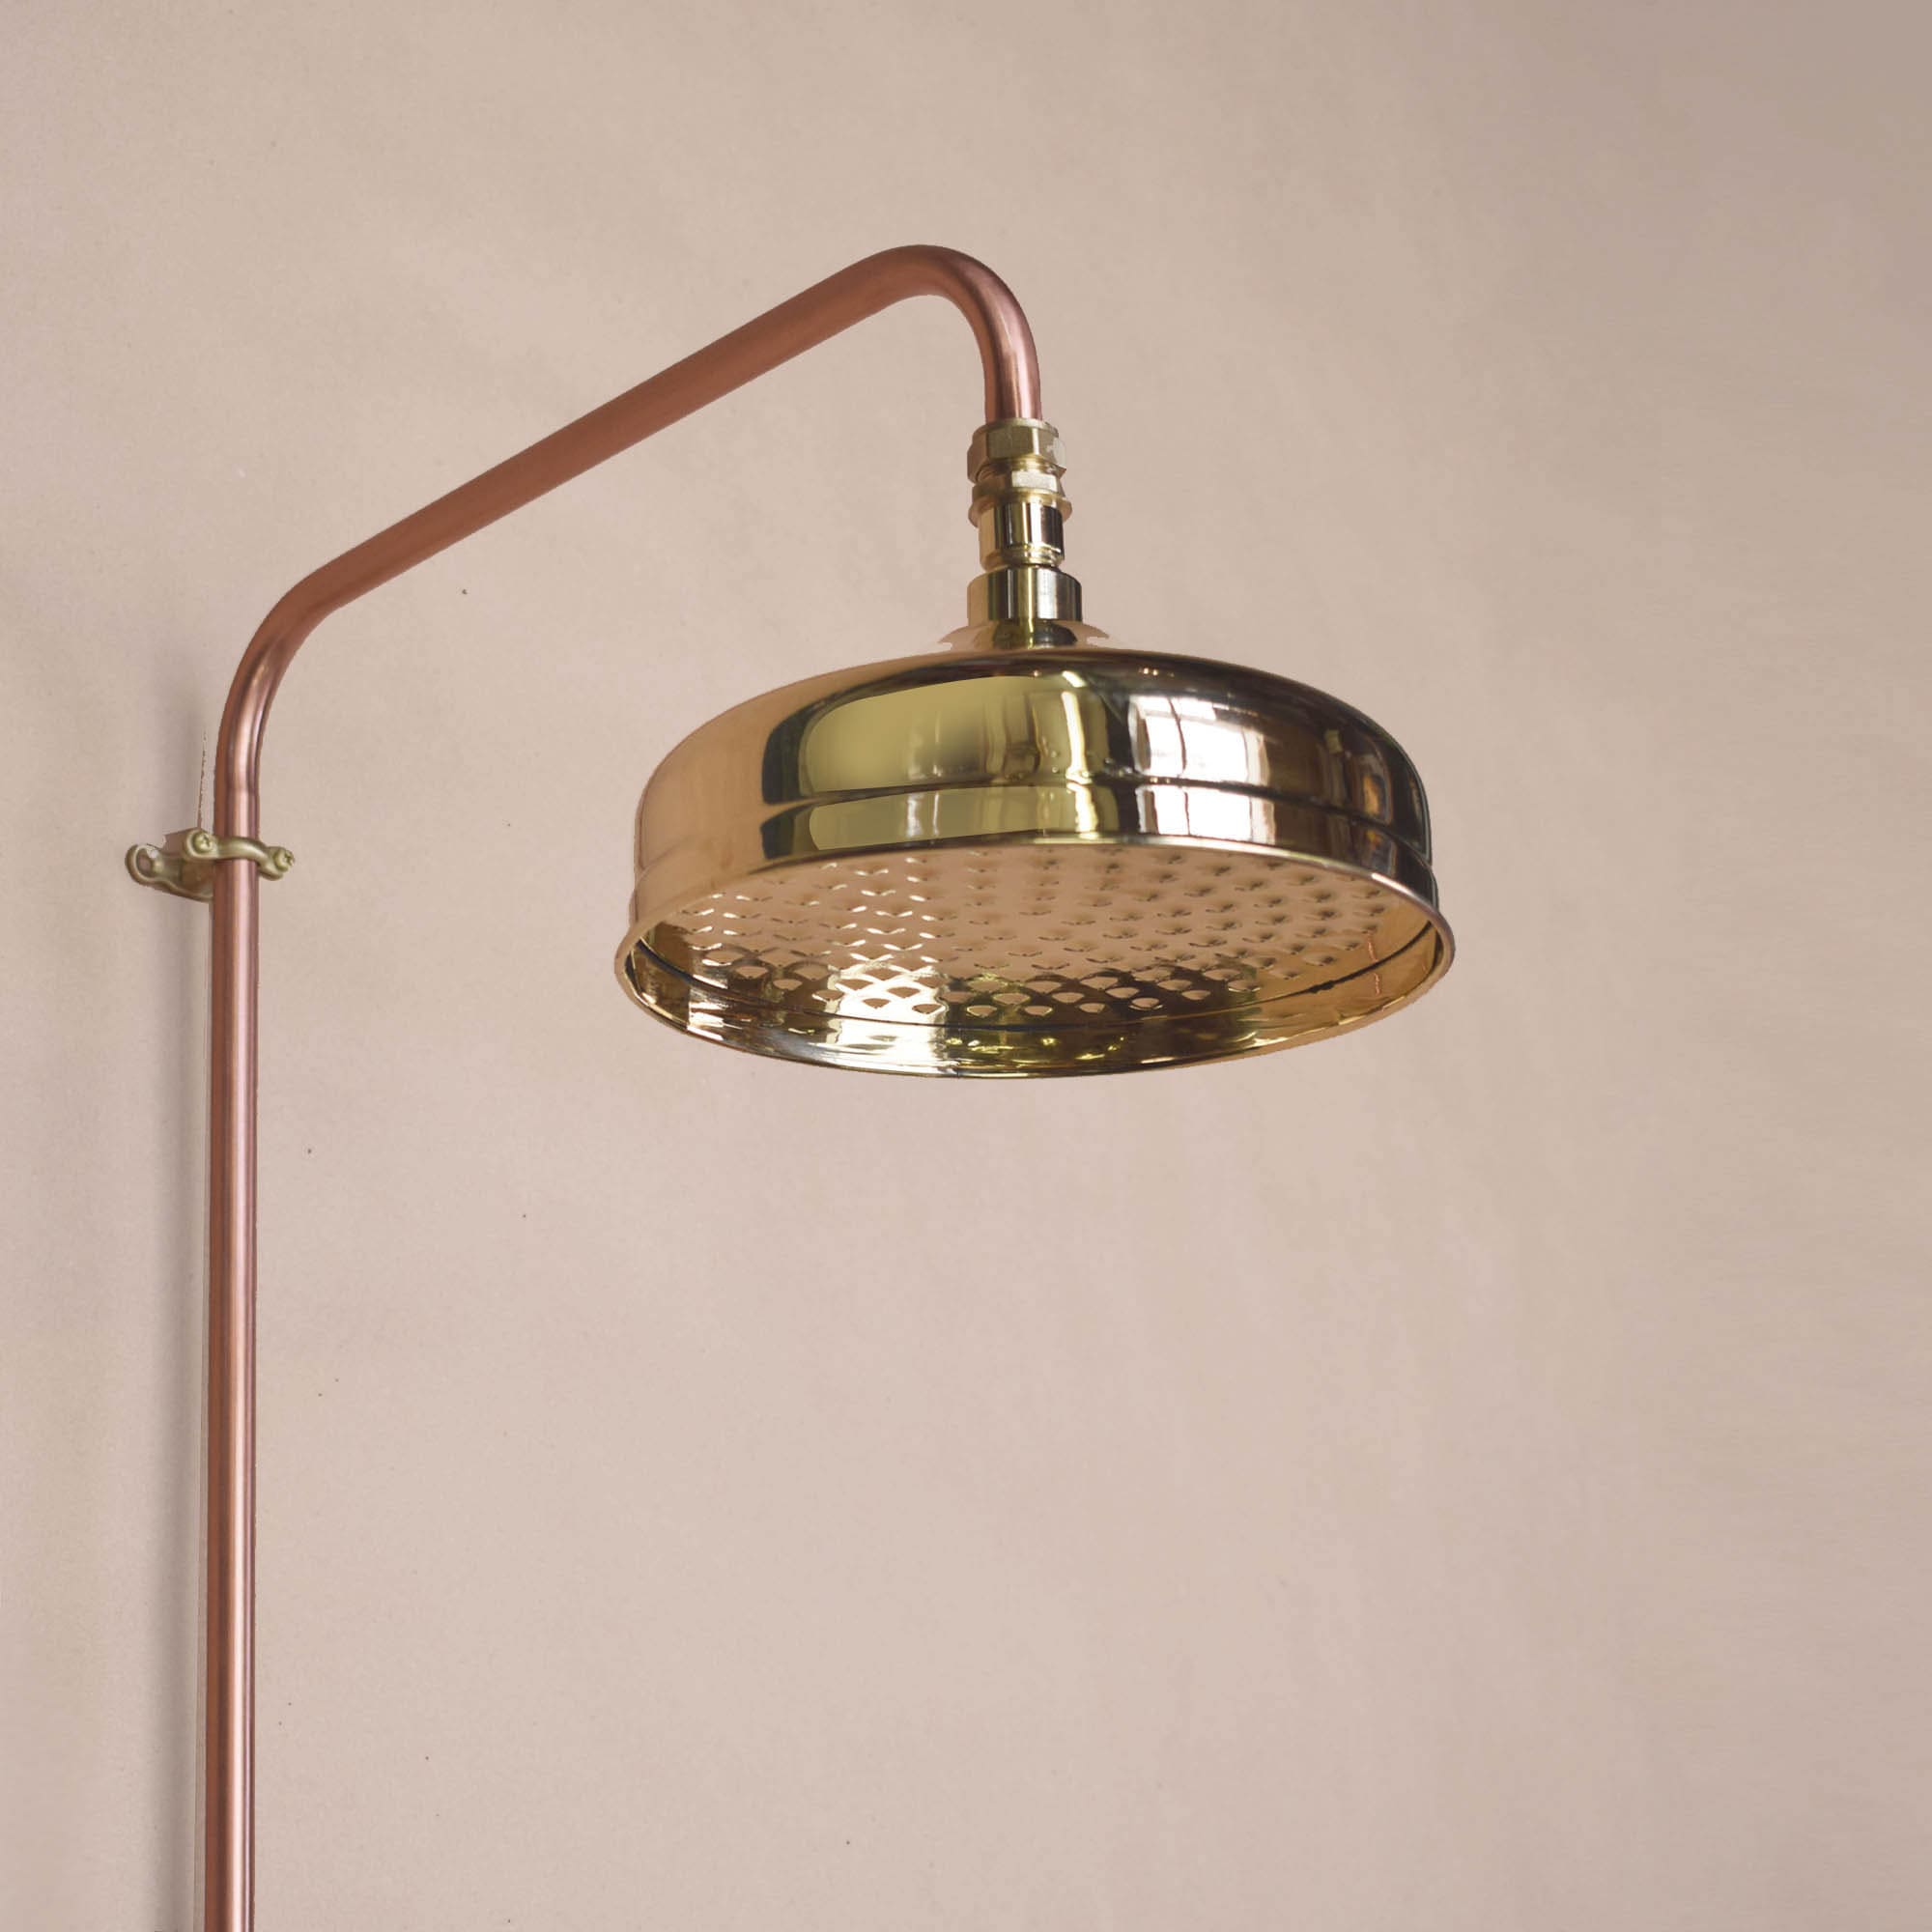 Get the Best Outdoor Shower Experience with our copper or brass outside showers